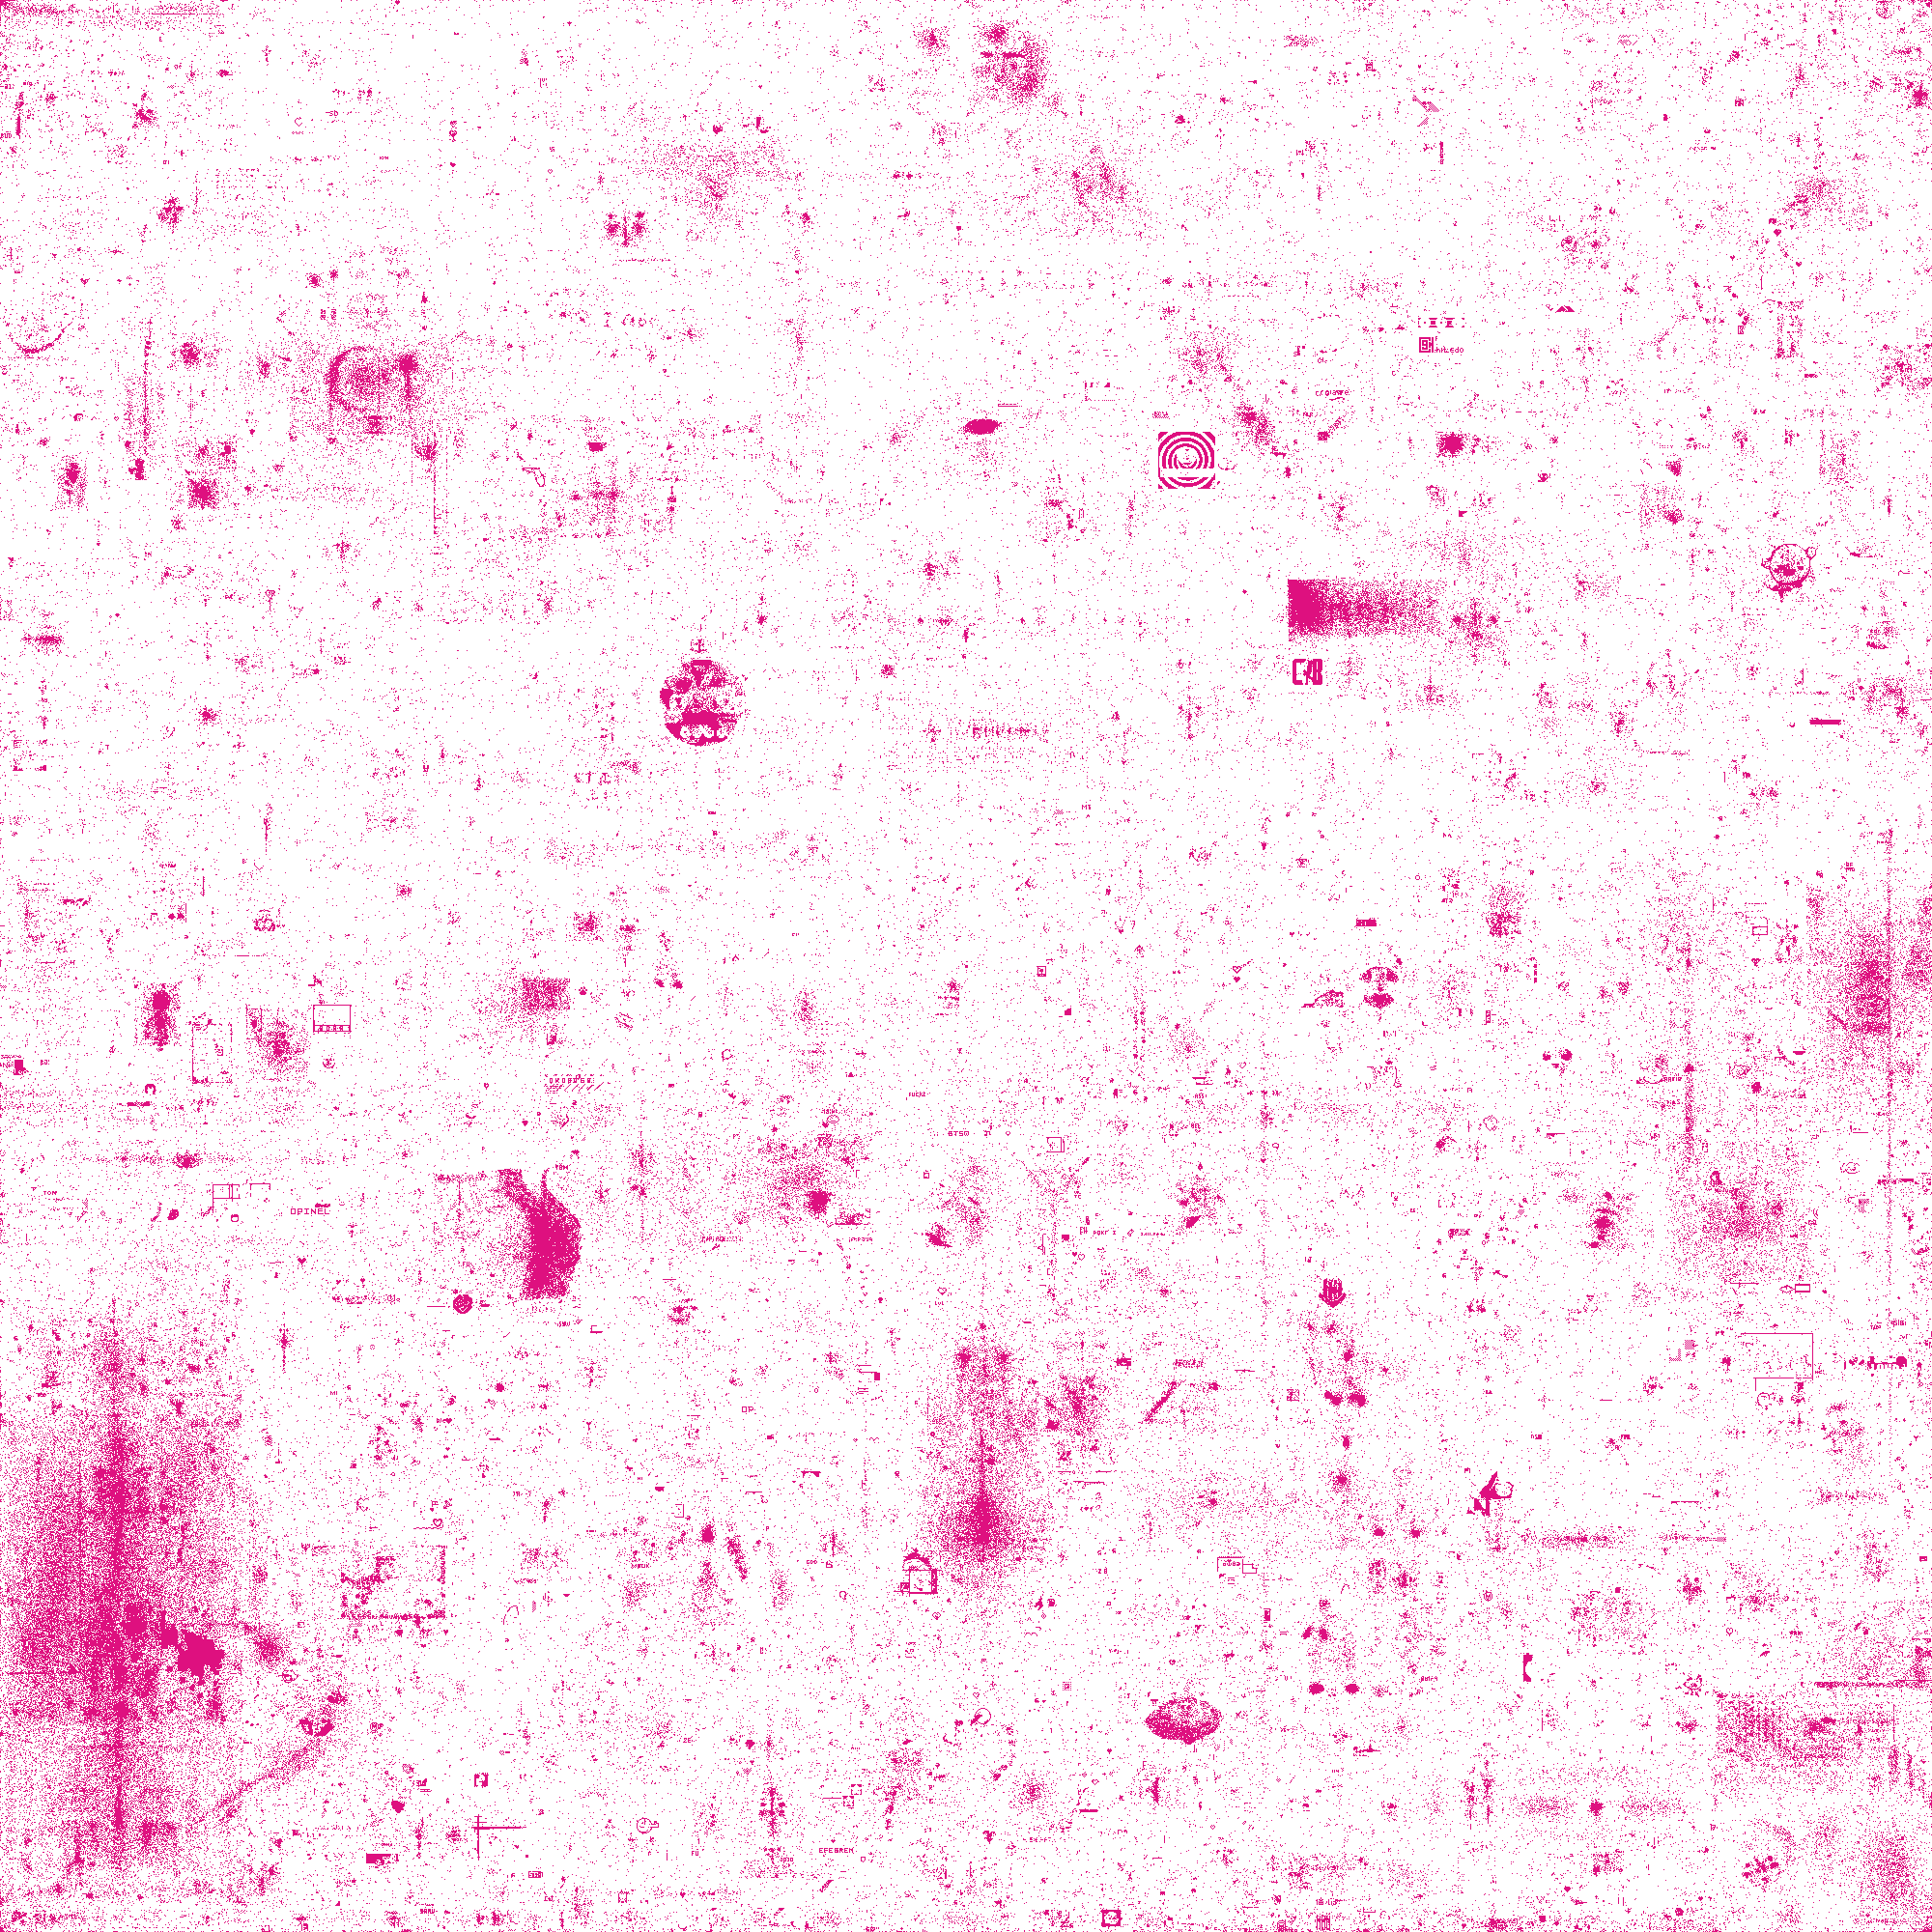 Magenta Only Visualization'